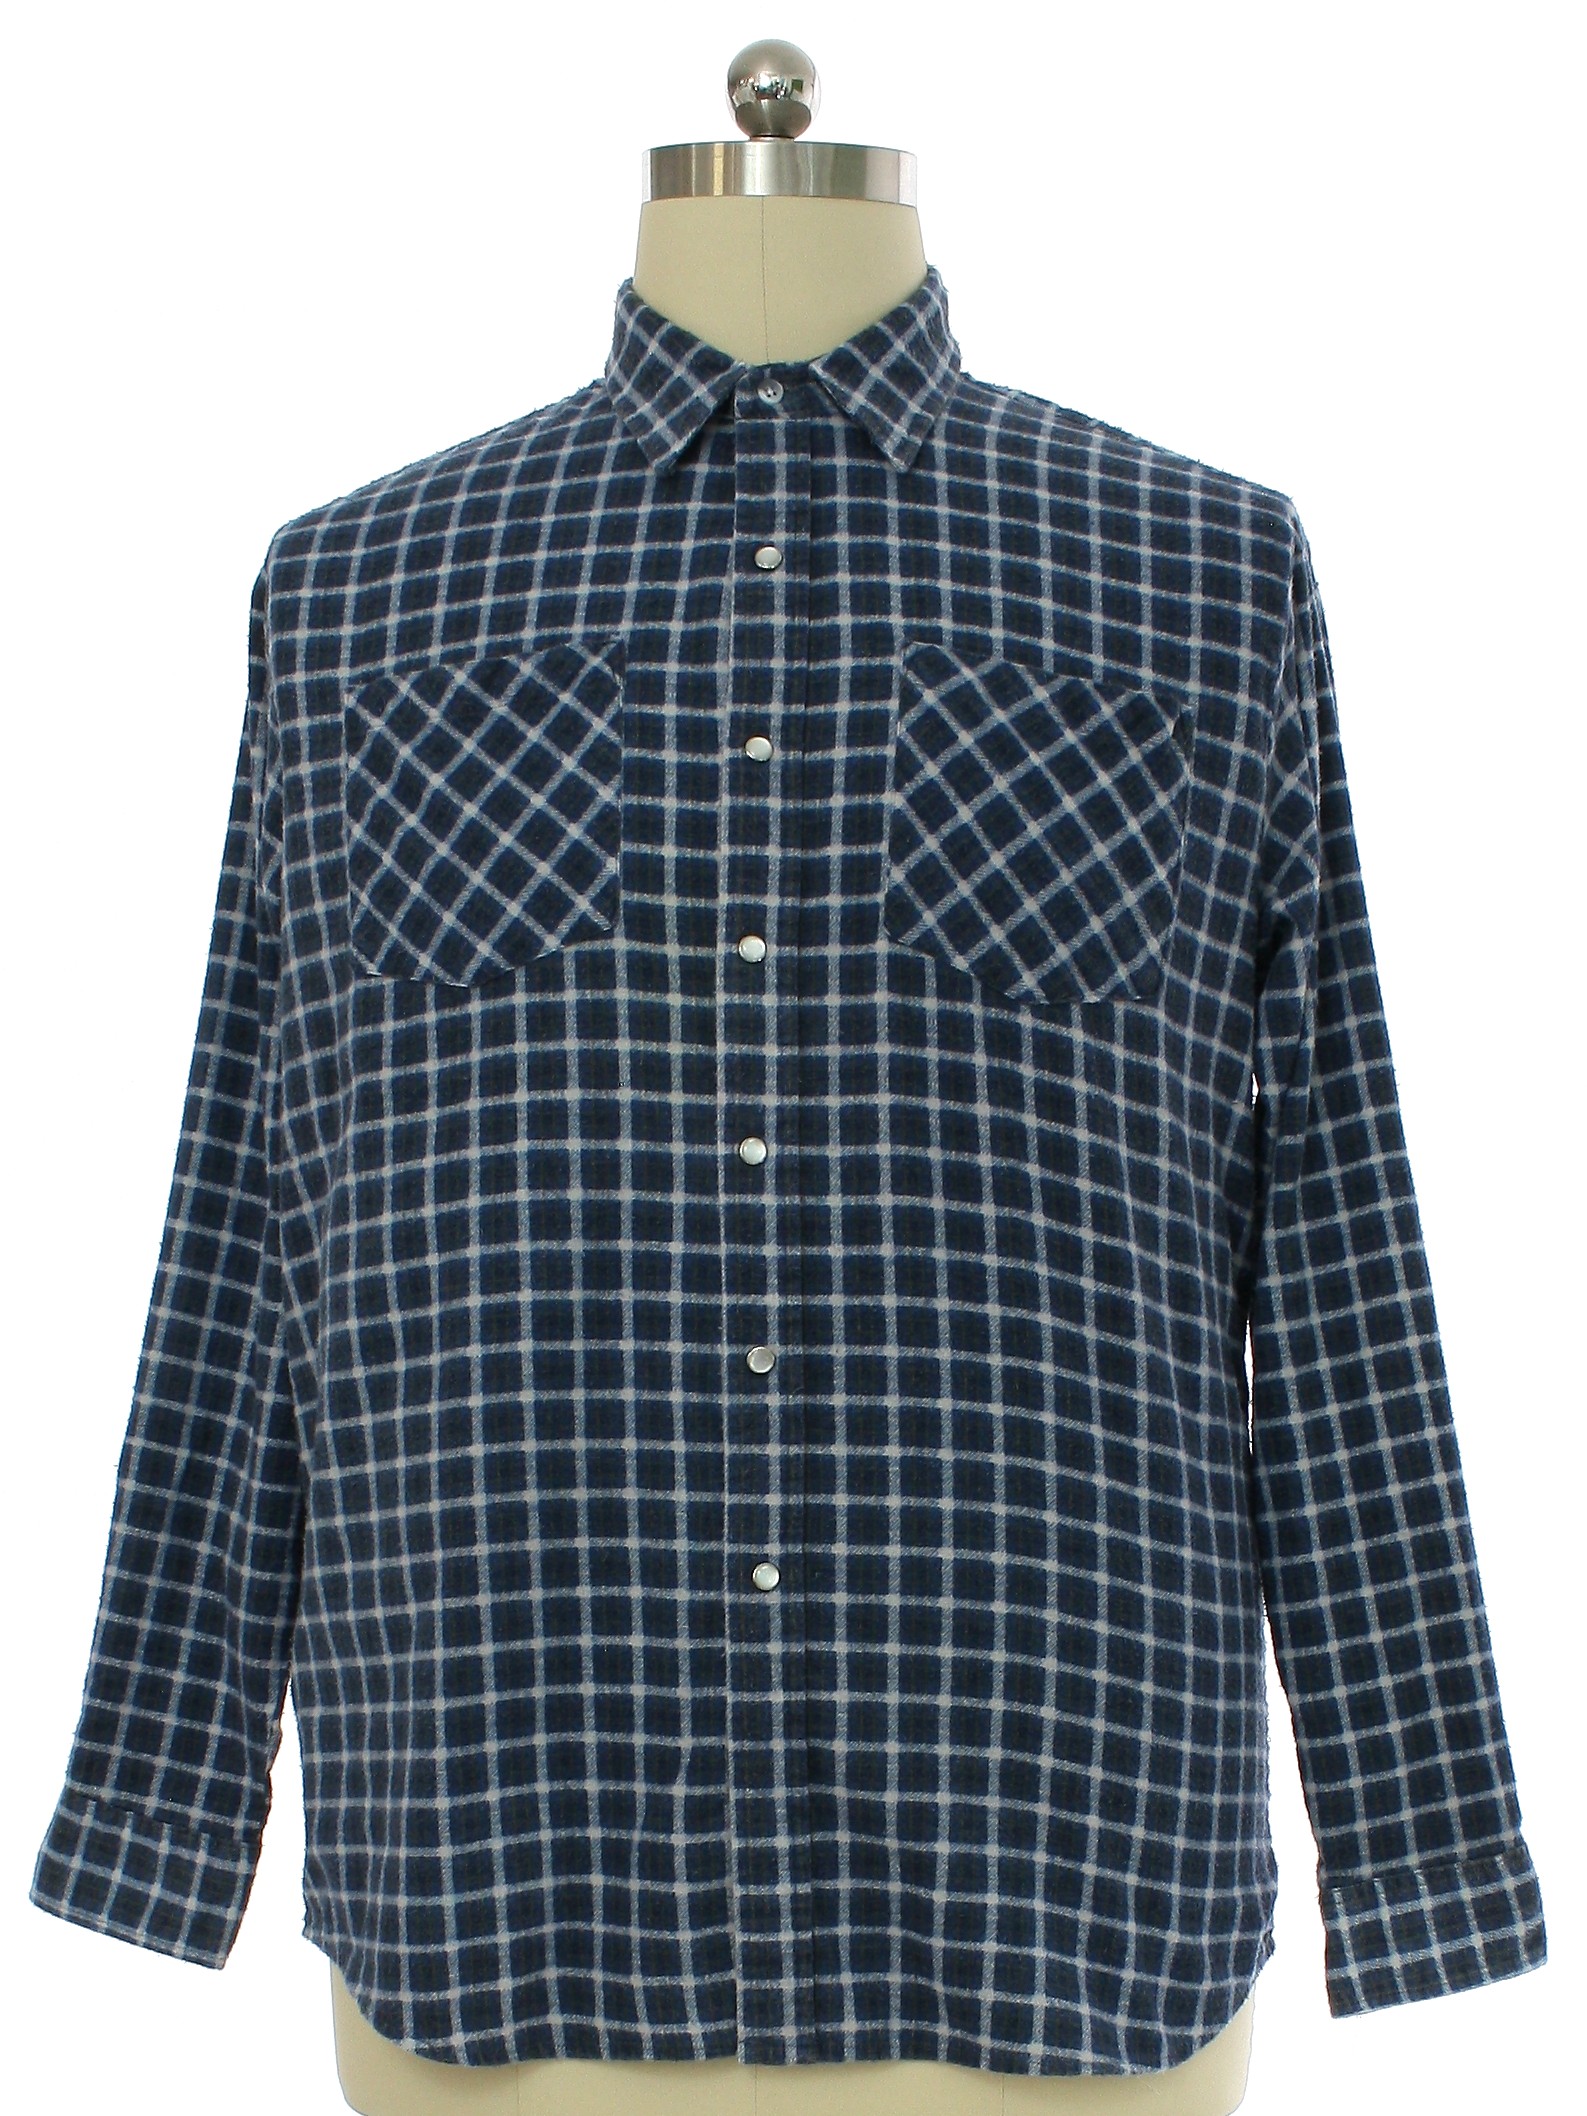 Shirt: 90s -Haband- Mens blue, white, and olive green plaid cotton ...